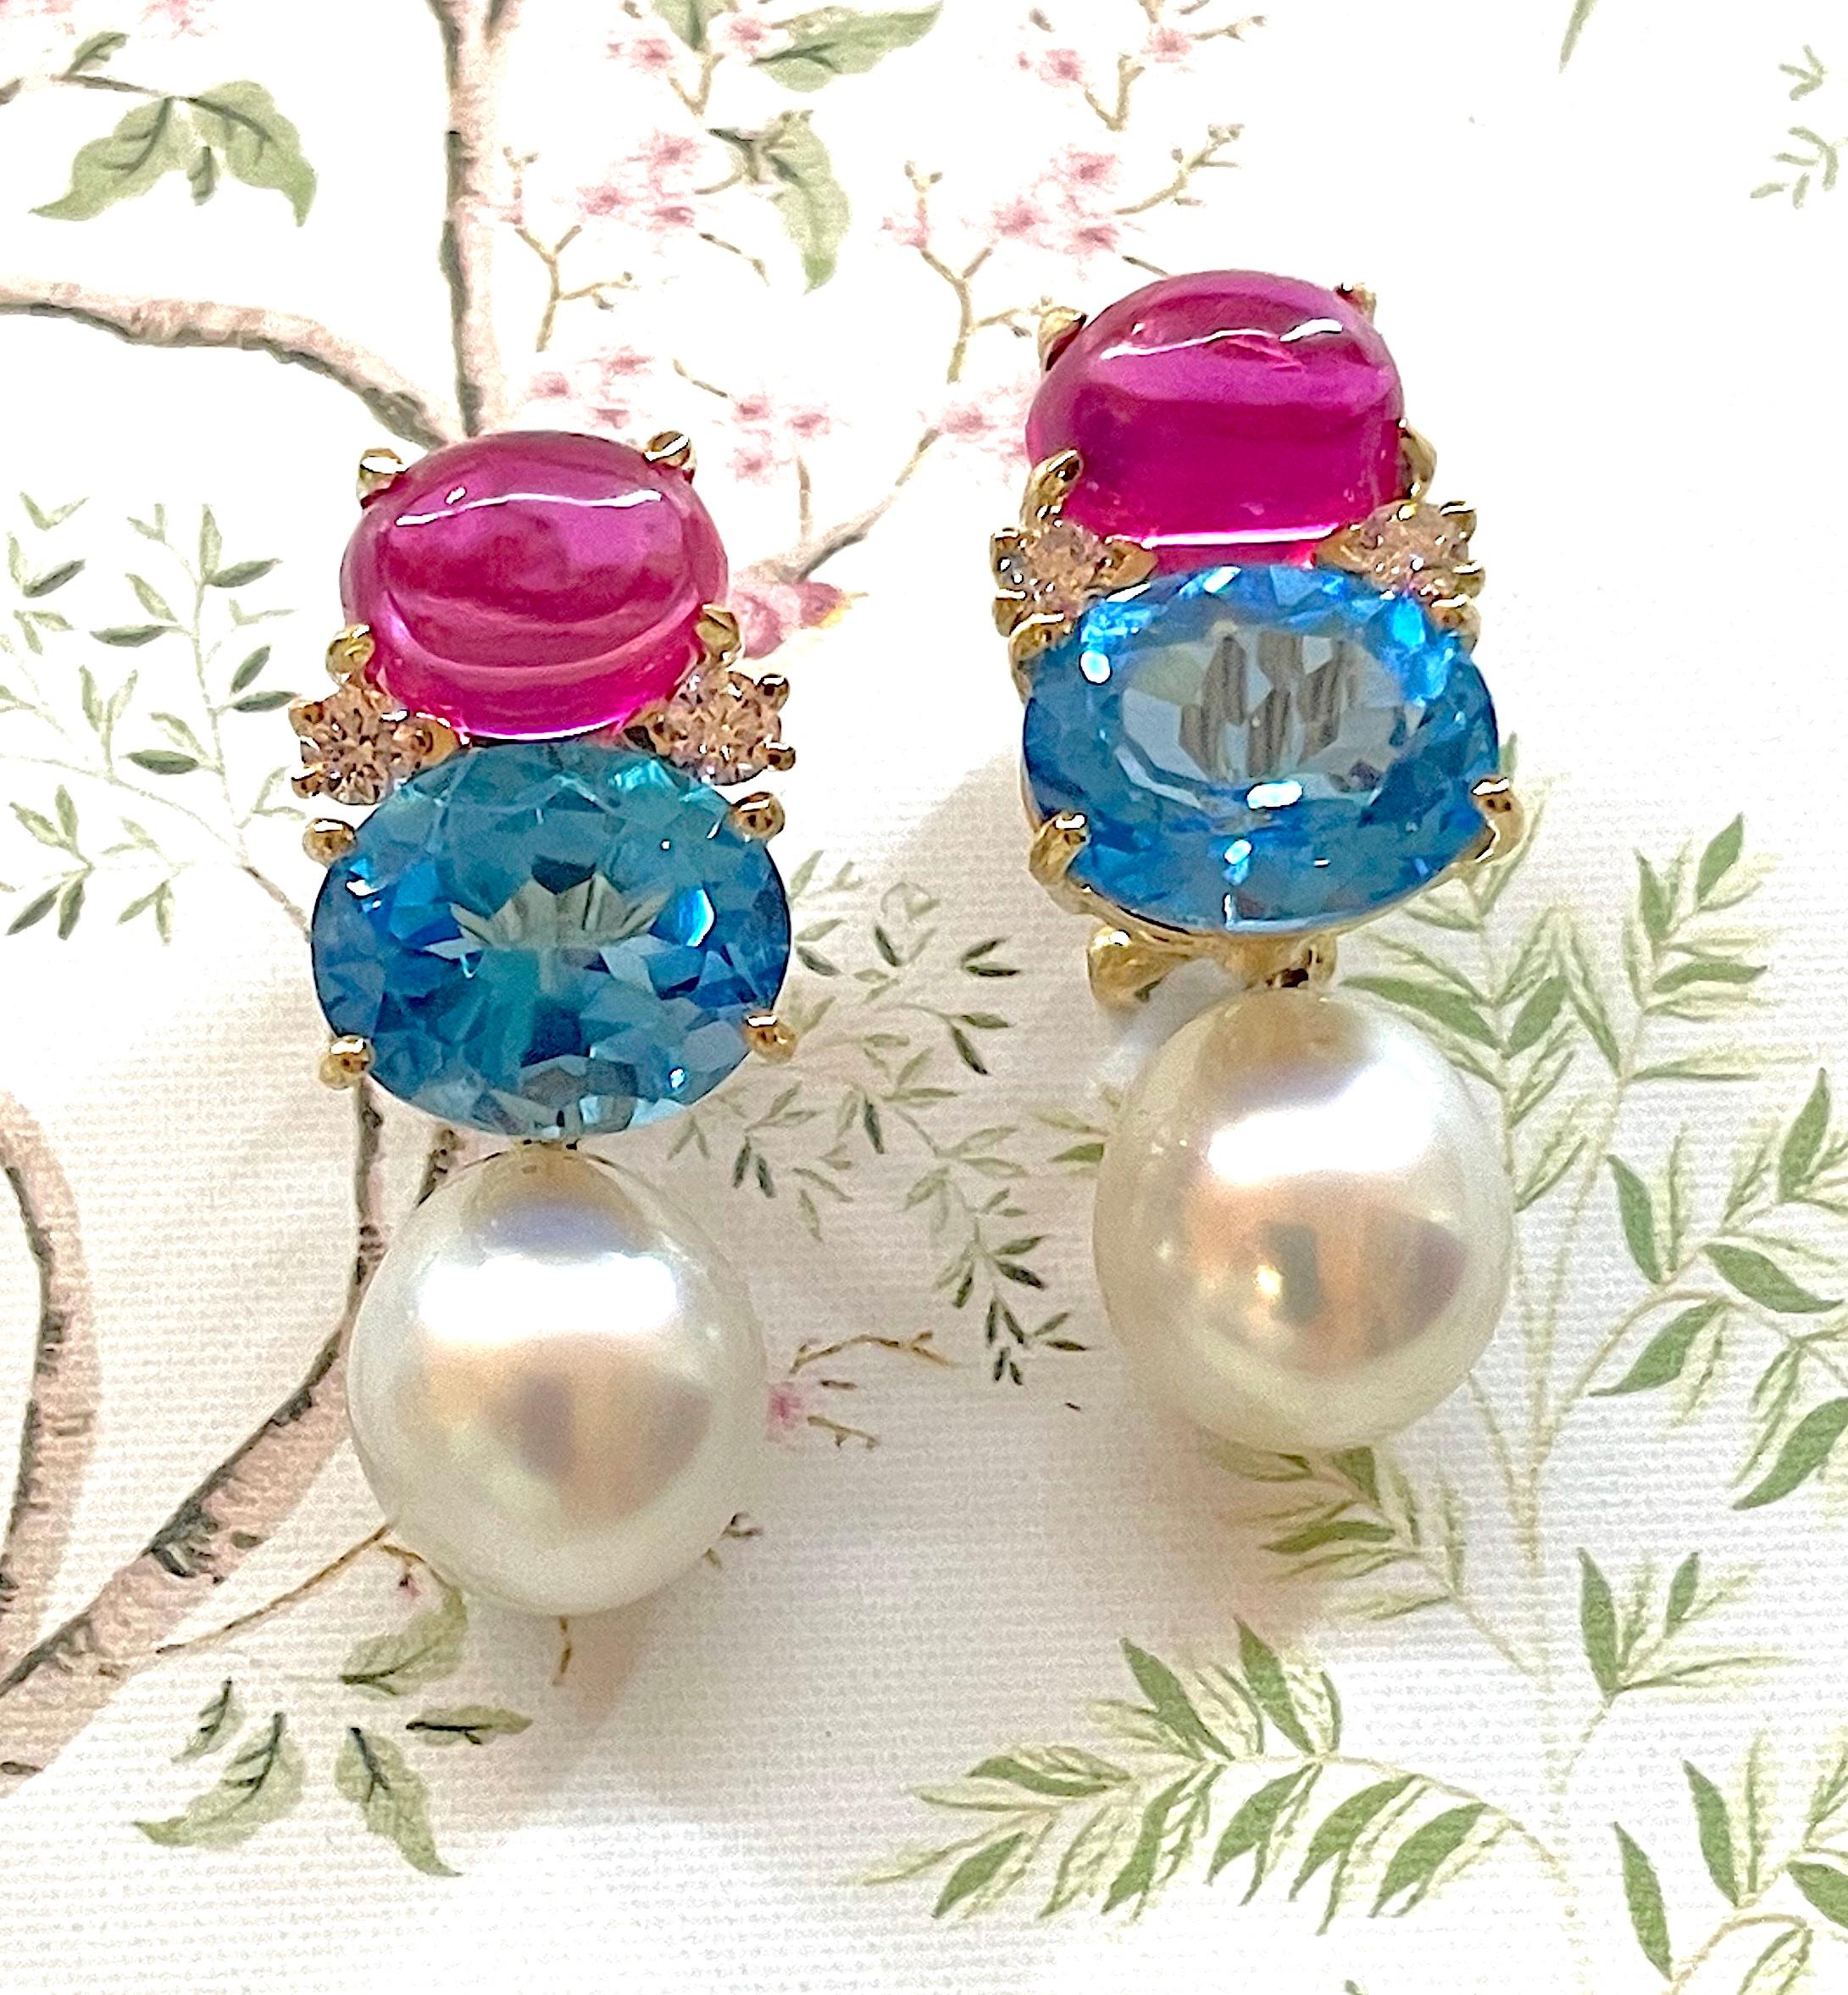 Medium 18kt yellow gold GUM DROP™ earrings with cabochon hot pink topaz and faceted Blue Topaz and four diamonds with detachable pearls is an elegant statement. 

The Cabochon Hot Pink Topaz (approximately 3 cts each), faceted Dark Blue Topaz